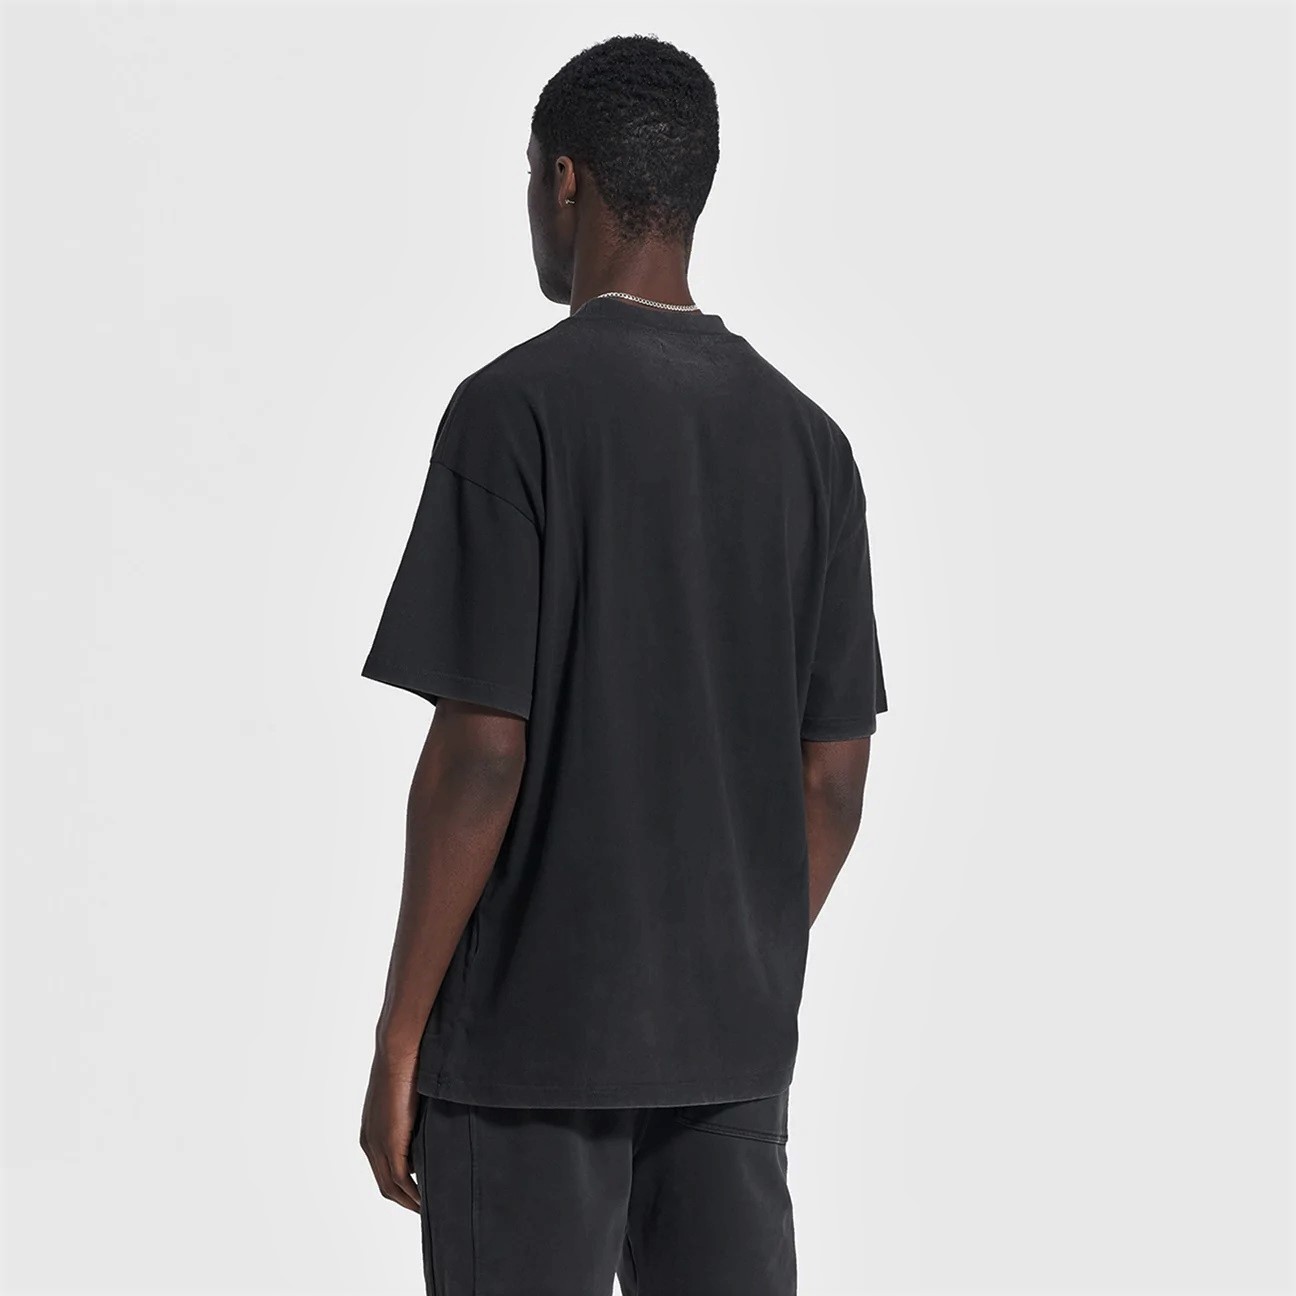 Represent Blank T-Shirt in Off Black